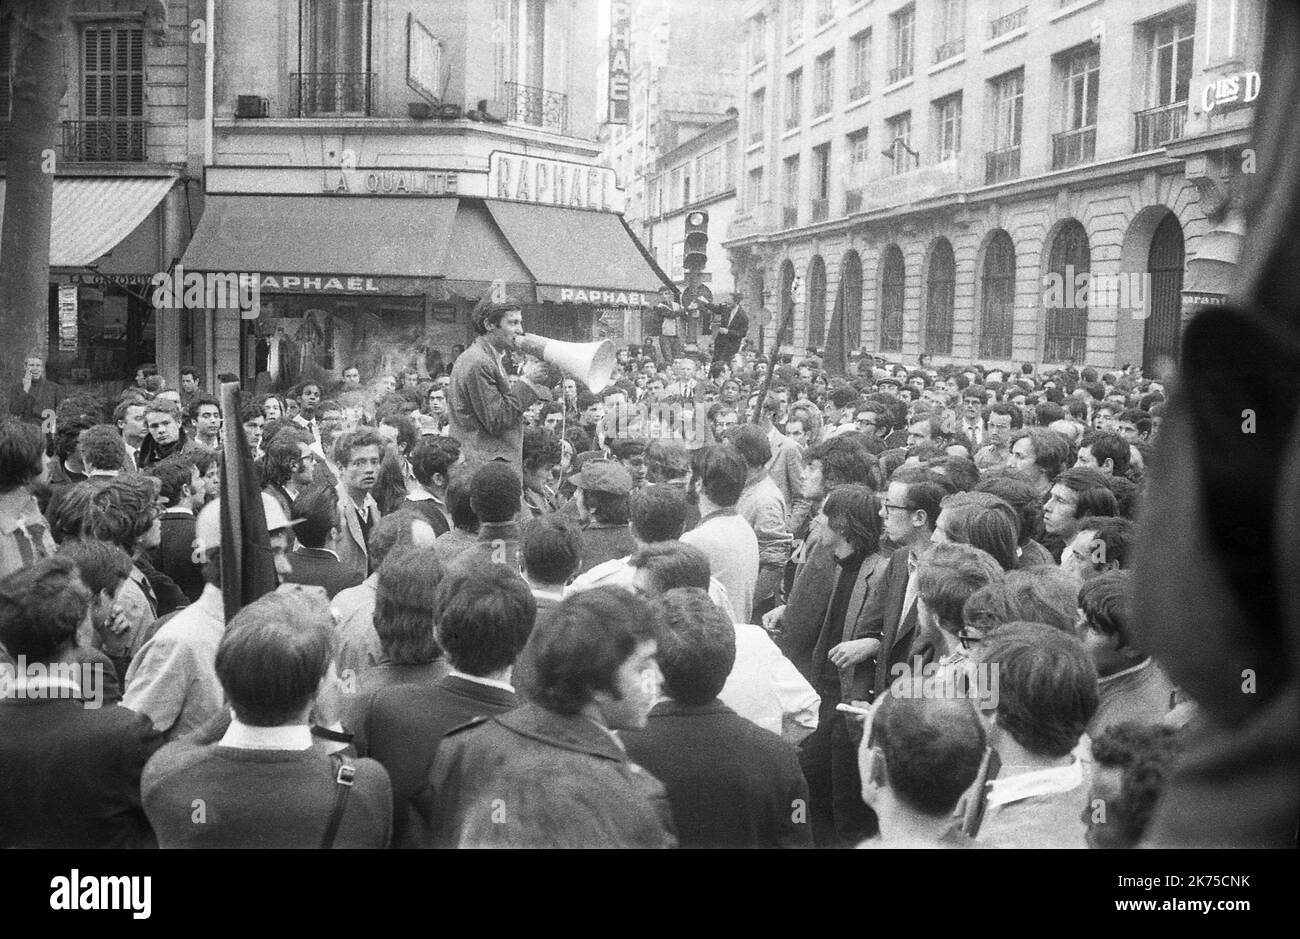 The volatile period of civil unrest in France during May 1968 was punctuated by demonstrations and massive general strikes as well as the occupation of universities and factories across France. At the height of its fervor, it brought the entire economy of France to a virtual halt. The protests reached such a point that political leaders feared civil war or revolution; the national government itself momentarily ceased to function after President CharlesdeGaulle secretly fled France for a few hours. The protests spurred an artistic movement, with songs, imaginative graffiti, posters, and slogans Stock Photo